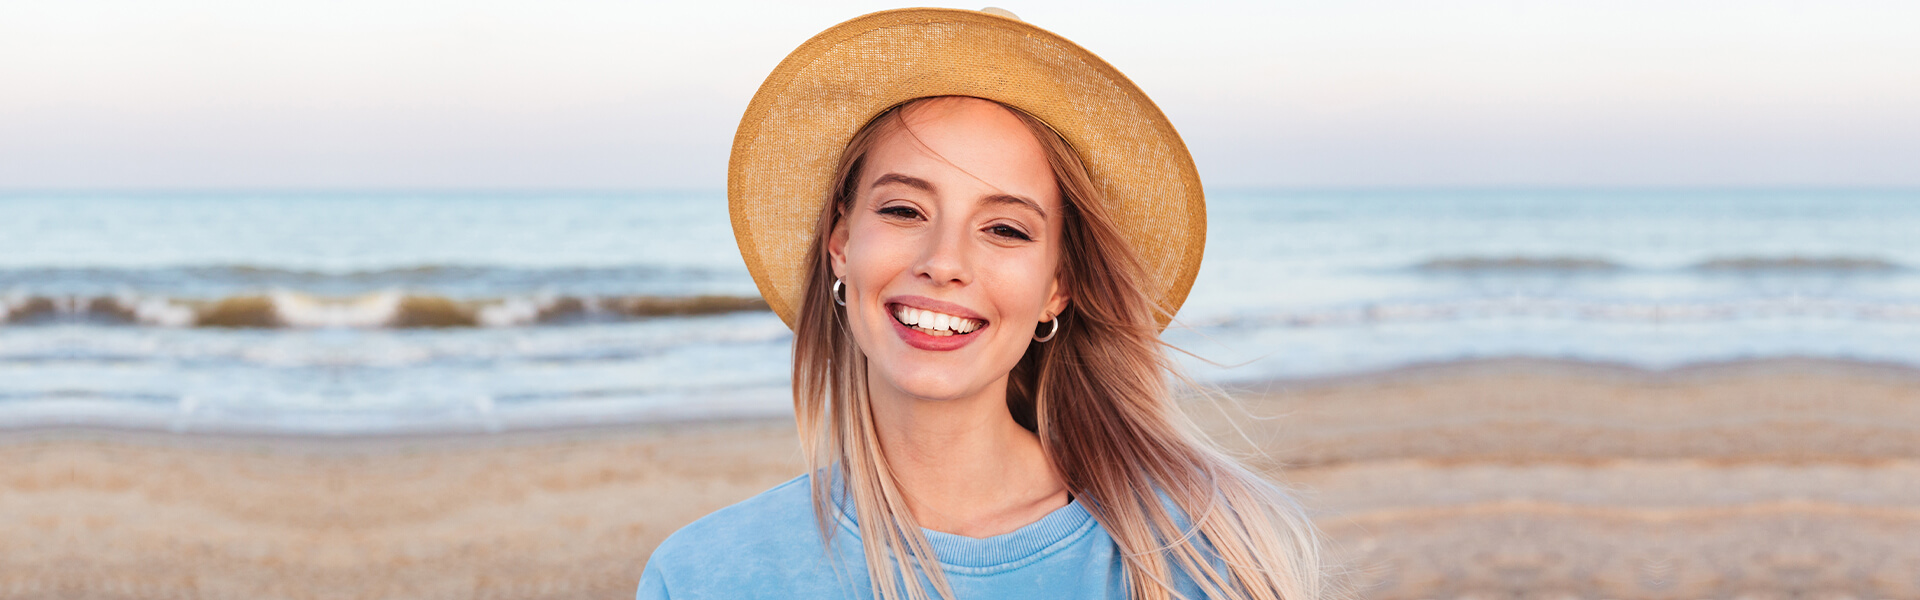 Improve Your Smile with Dental Bonding